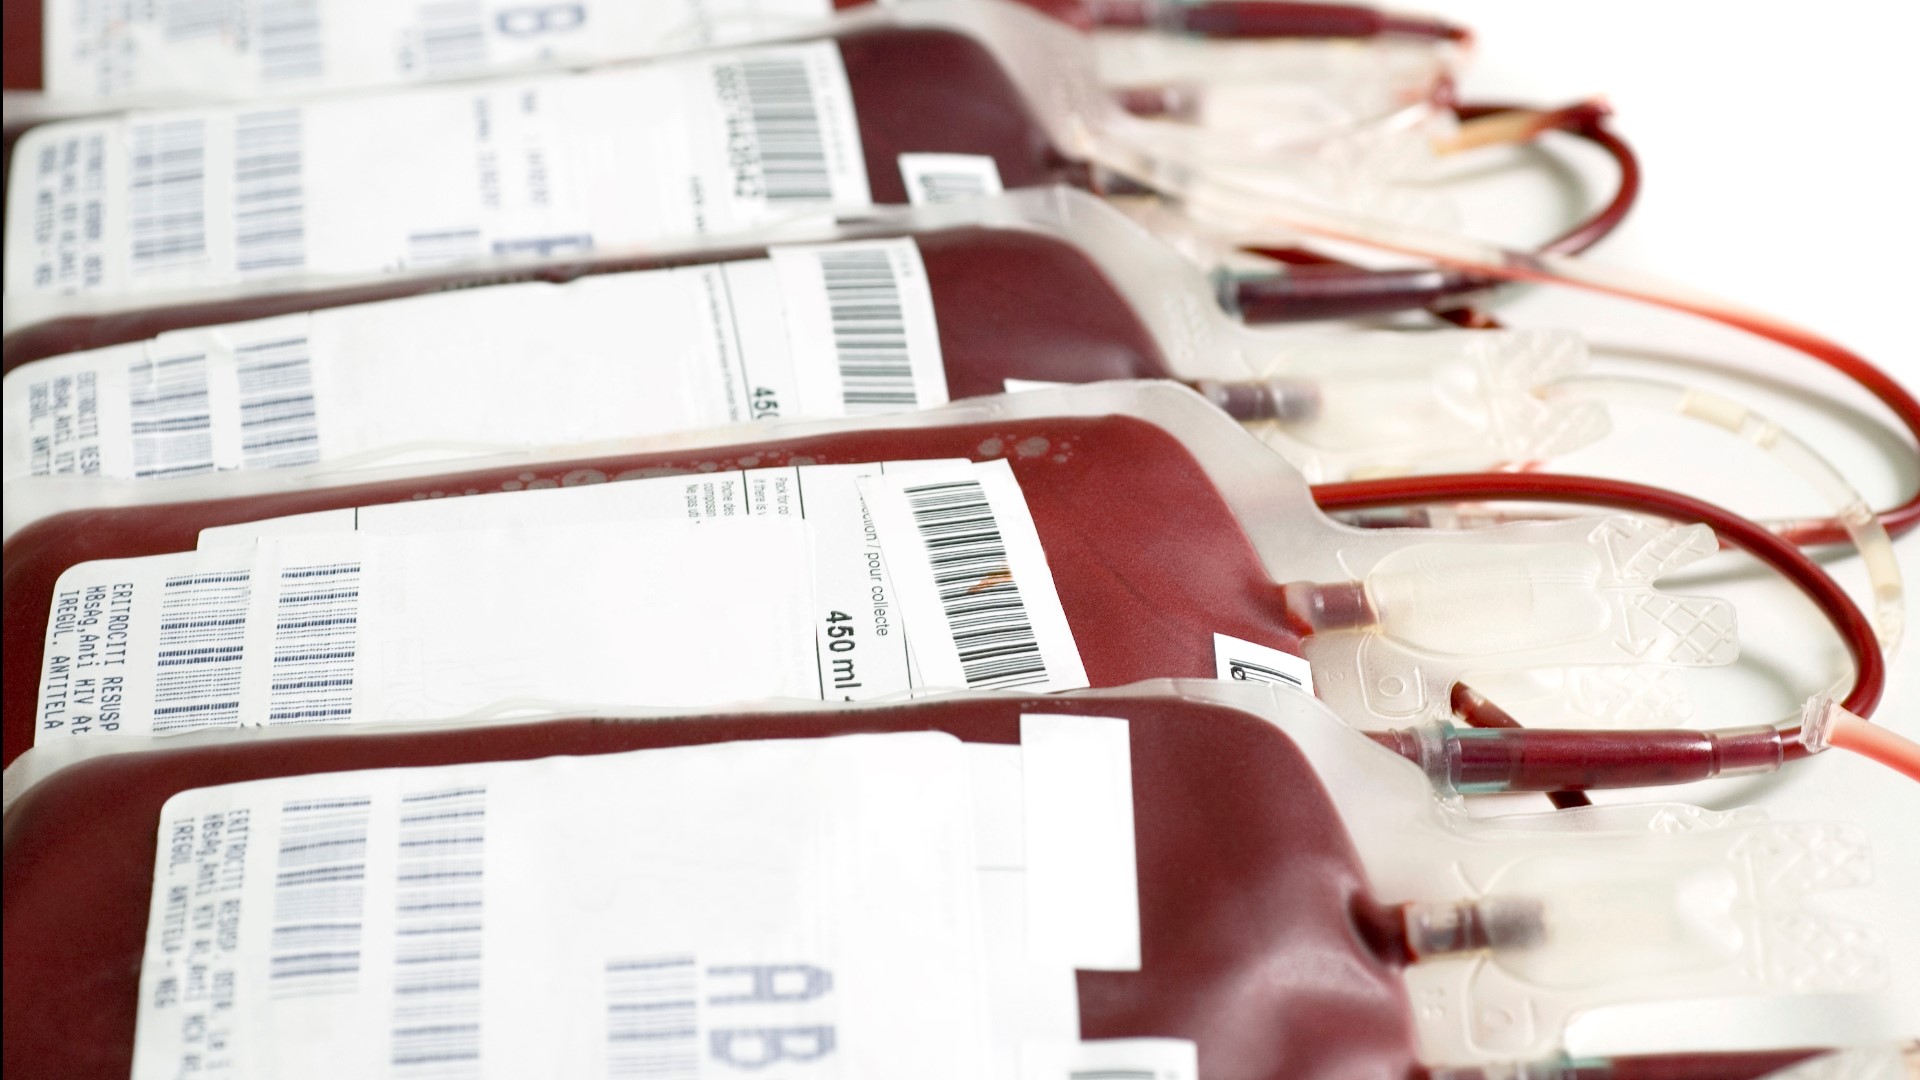 Versiti Blood Center of Michigan has issued an emergency appeal for blood donations as communities throughout the state are facing a potential crisis.